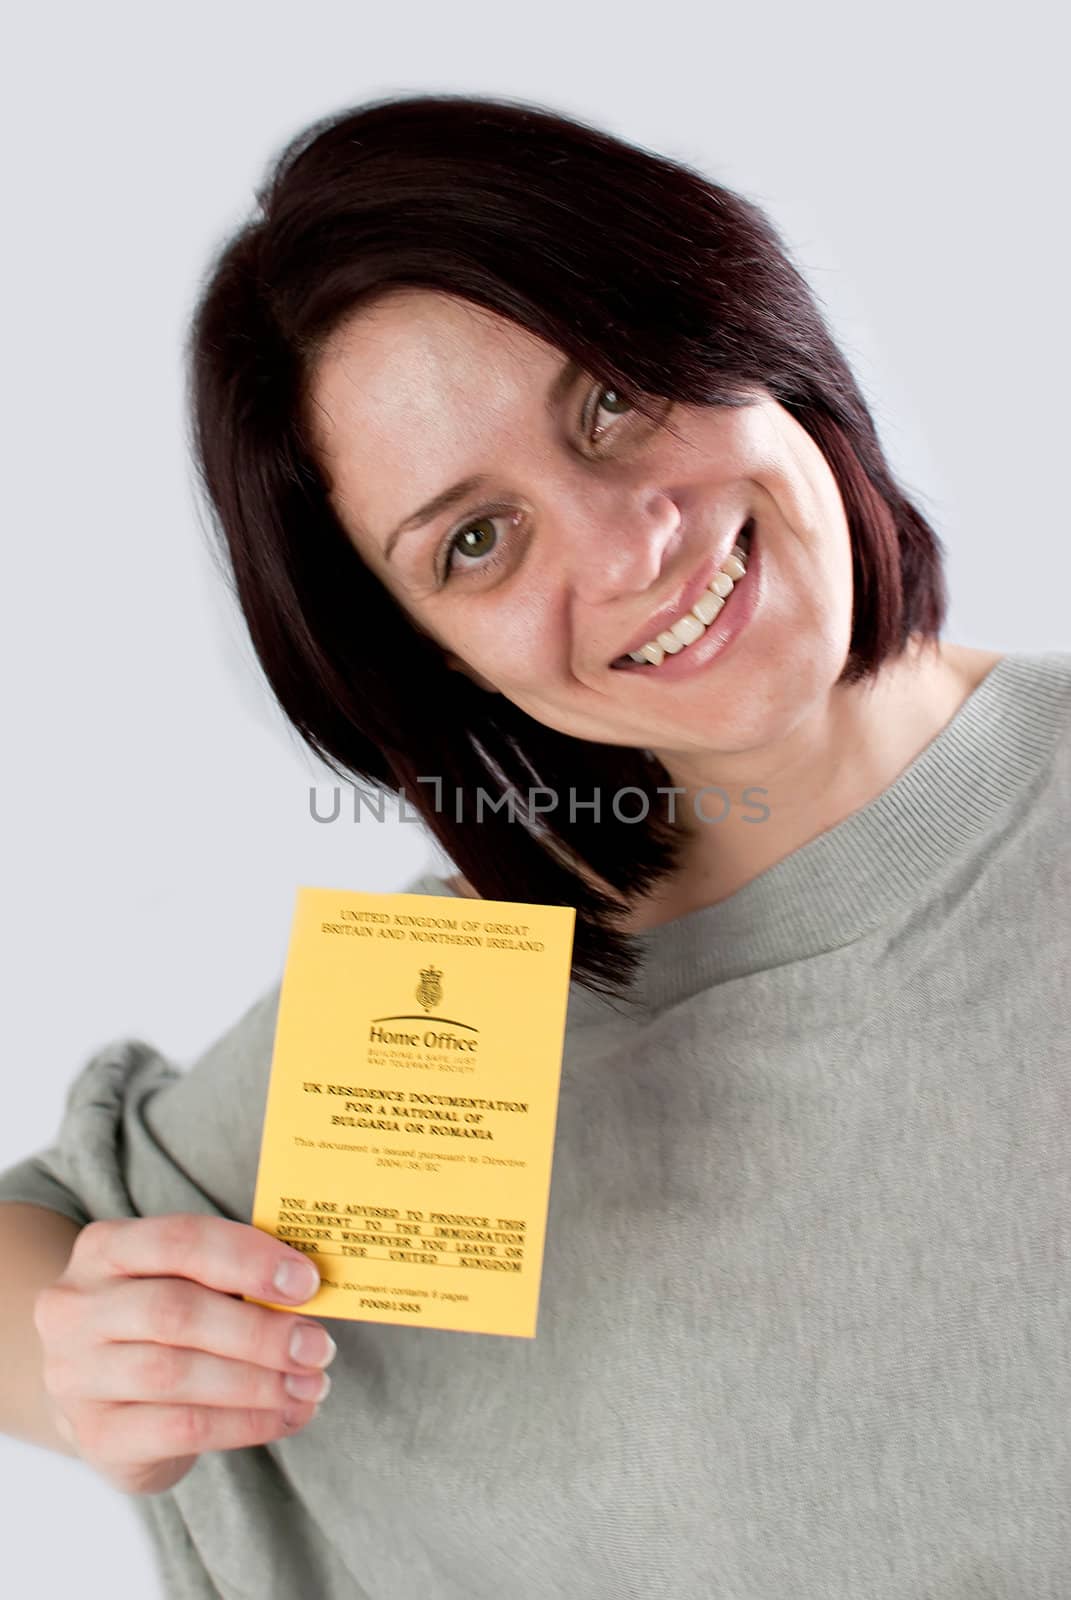 bulgarian immigrant holding uk work permission card for bulgarians and romanians